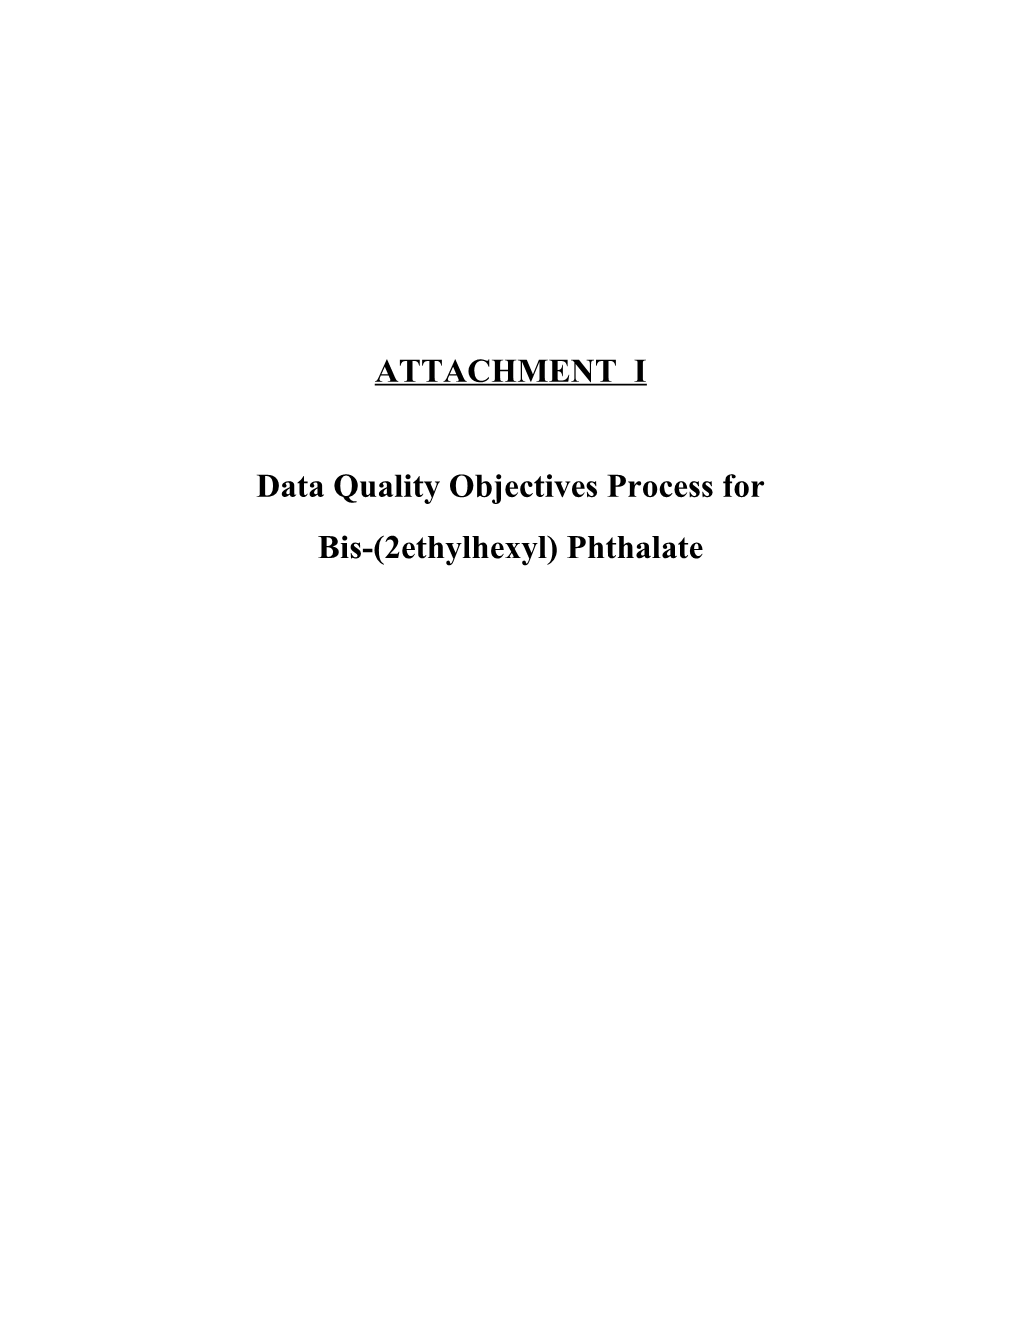 DRAFT Data Quality Objectives Process for Bis-2 RPA Study